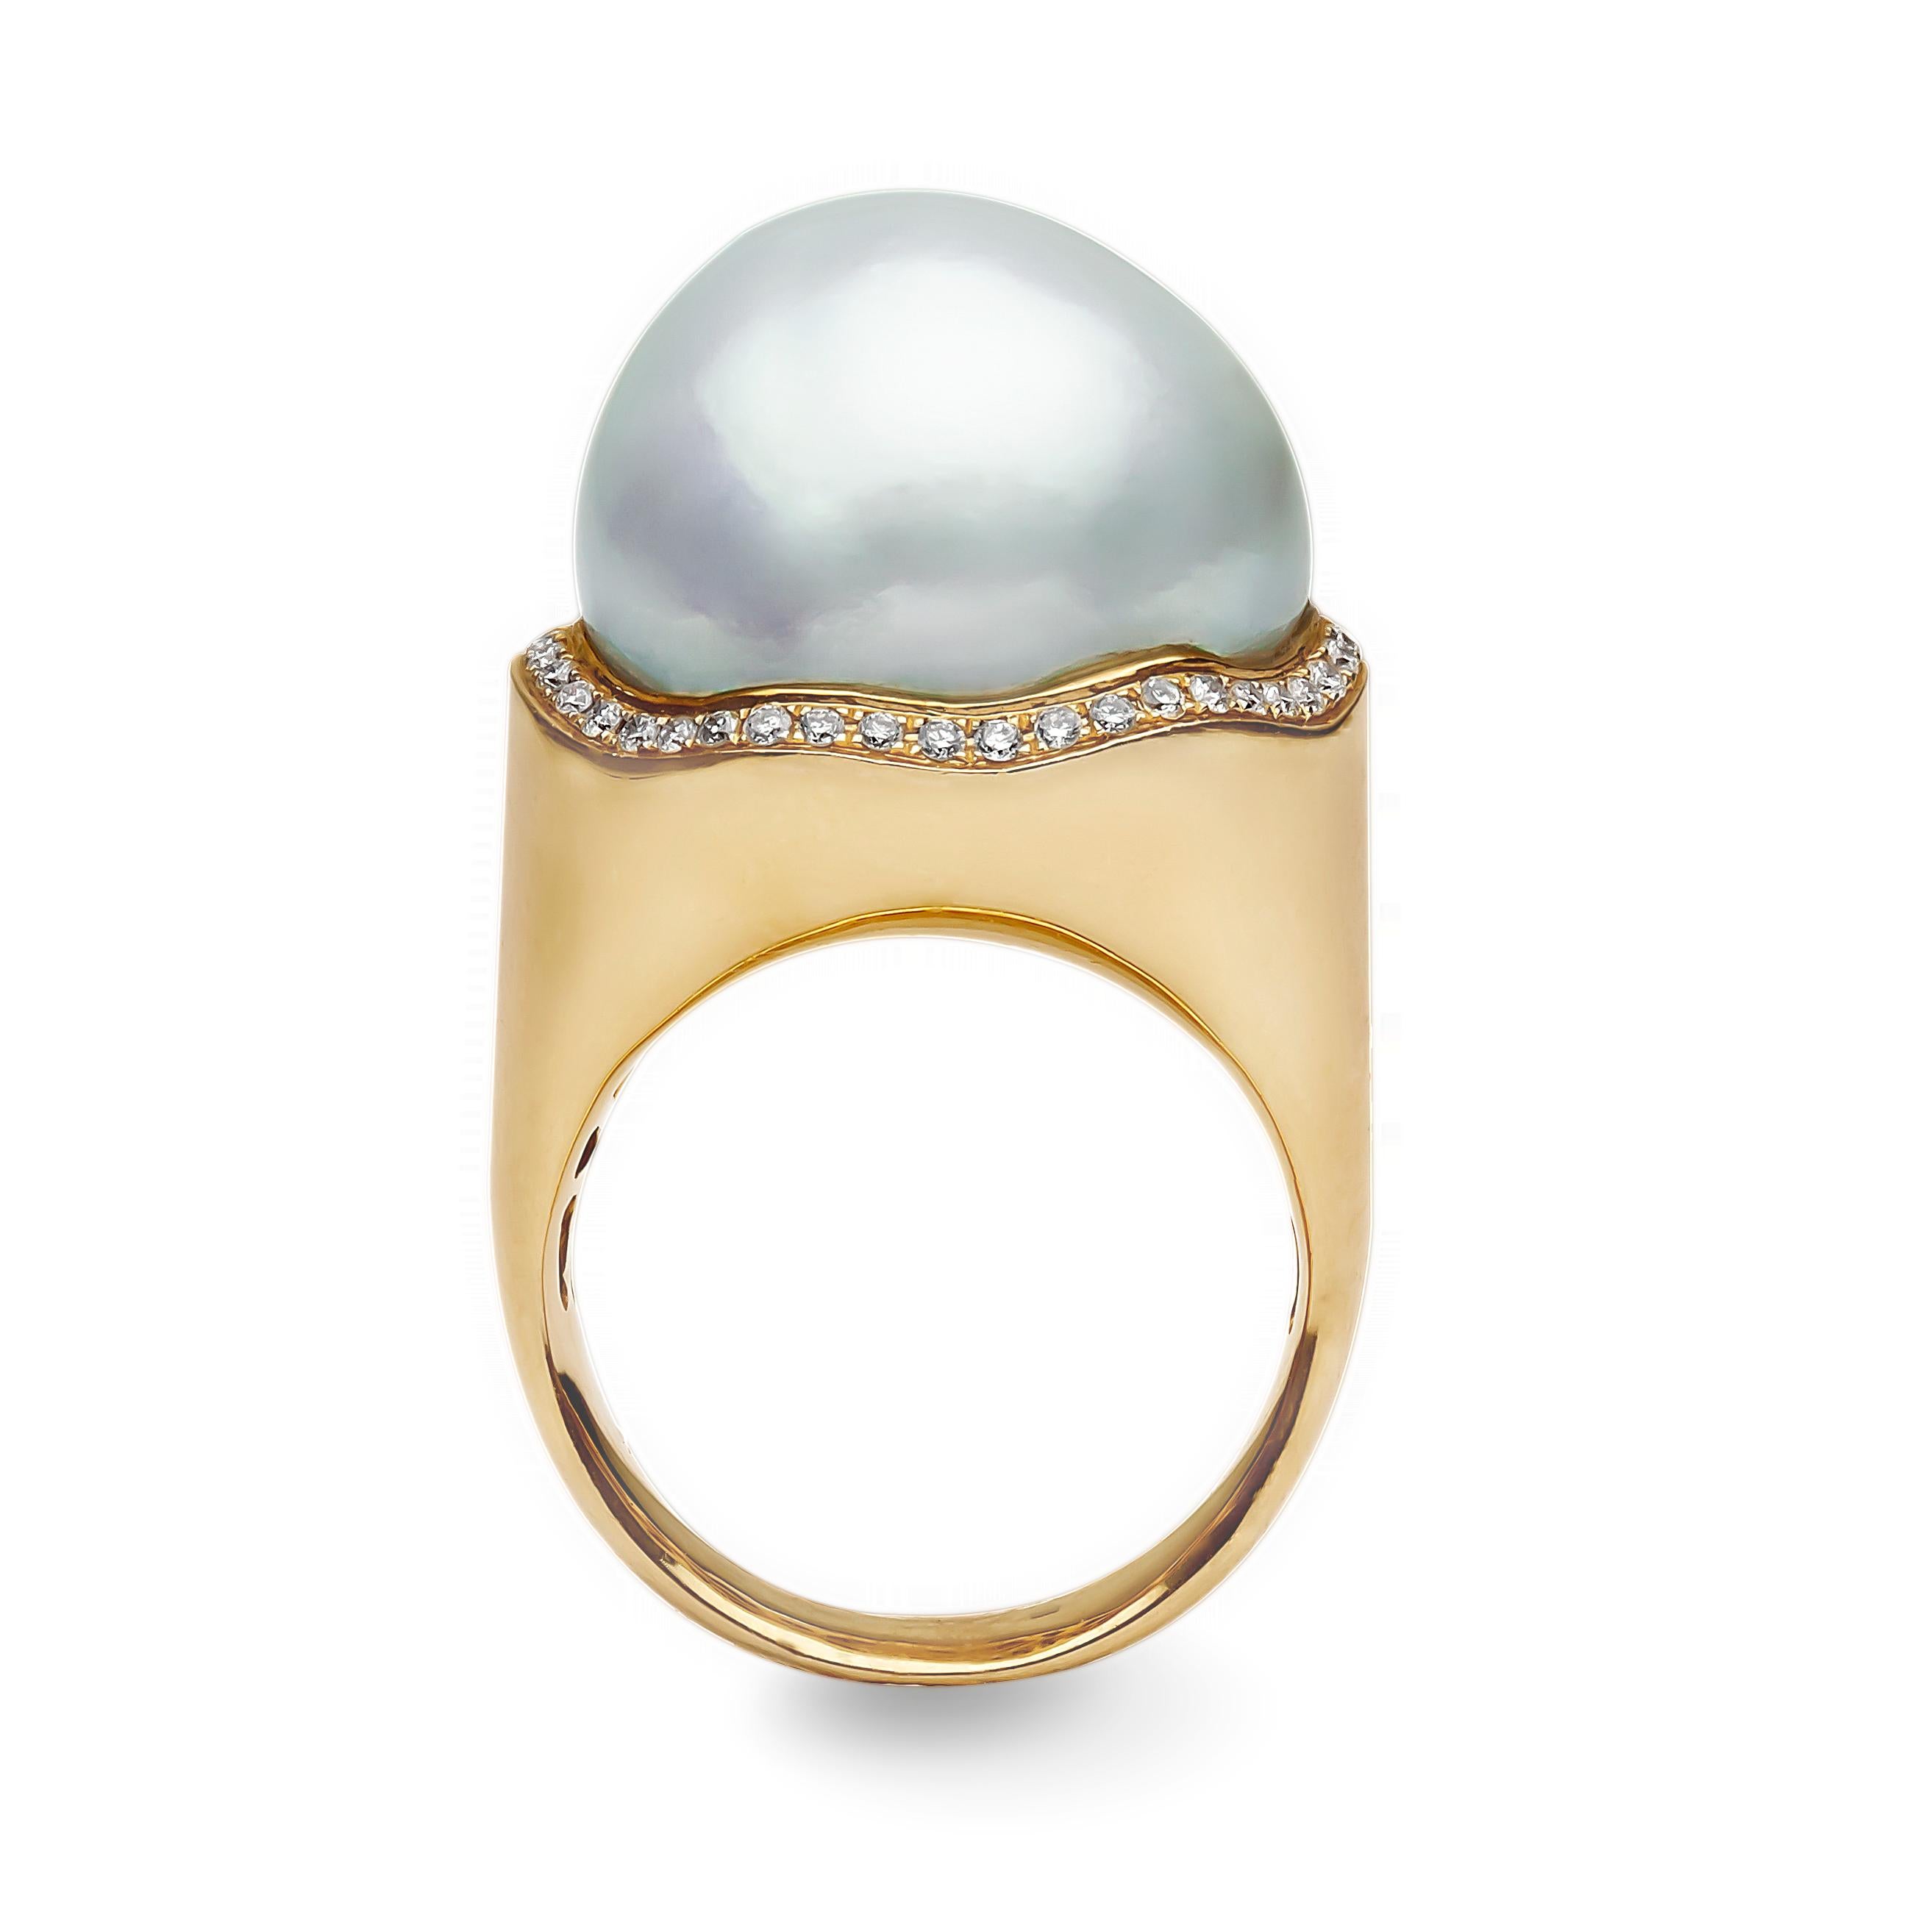 This exceptional ring by Yoko London features an alluring Baroque South Sea Pearl as it's focal point, which has been hand selected by our experts. Surrounded by a swirl of diamonds, and encased in a bold 18 Karat Yellow Gold setting, the ring has